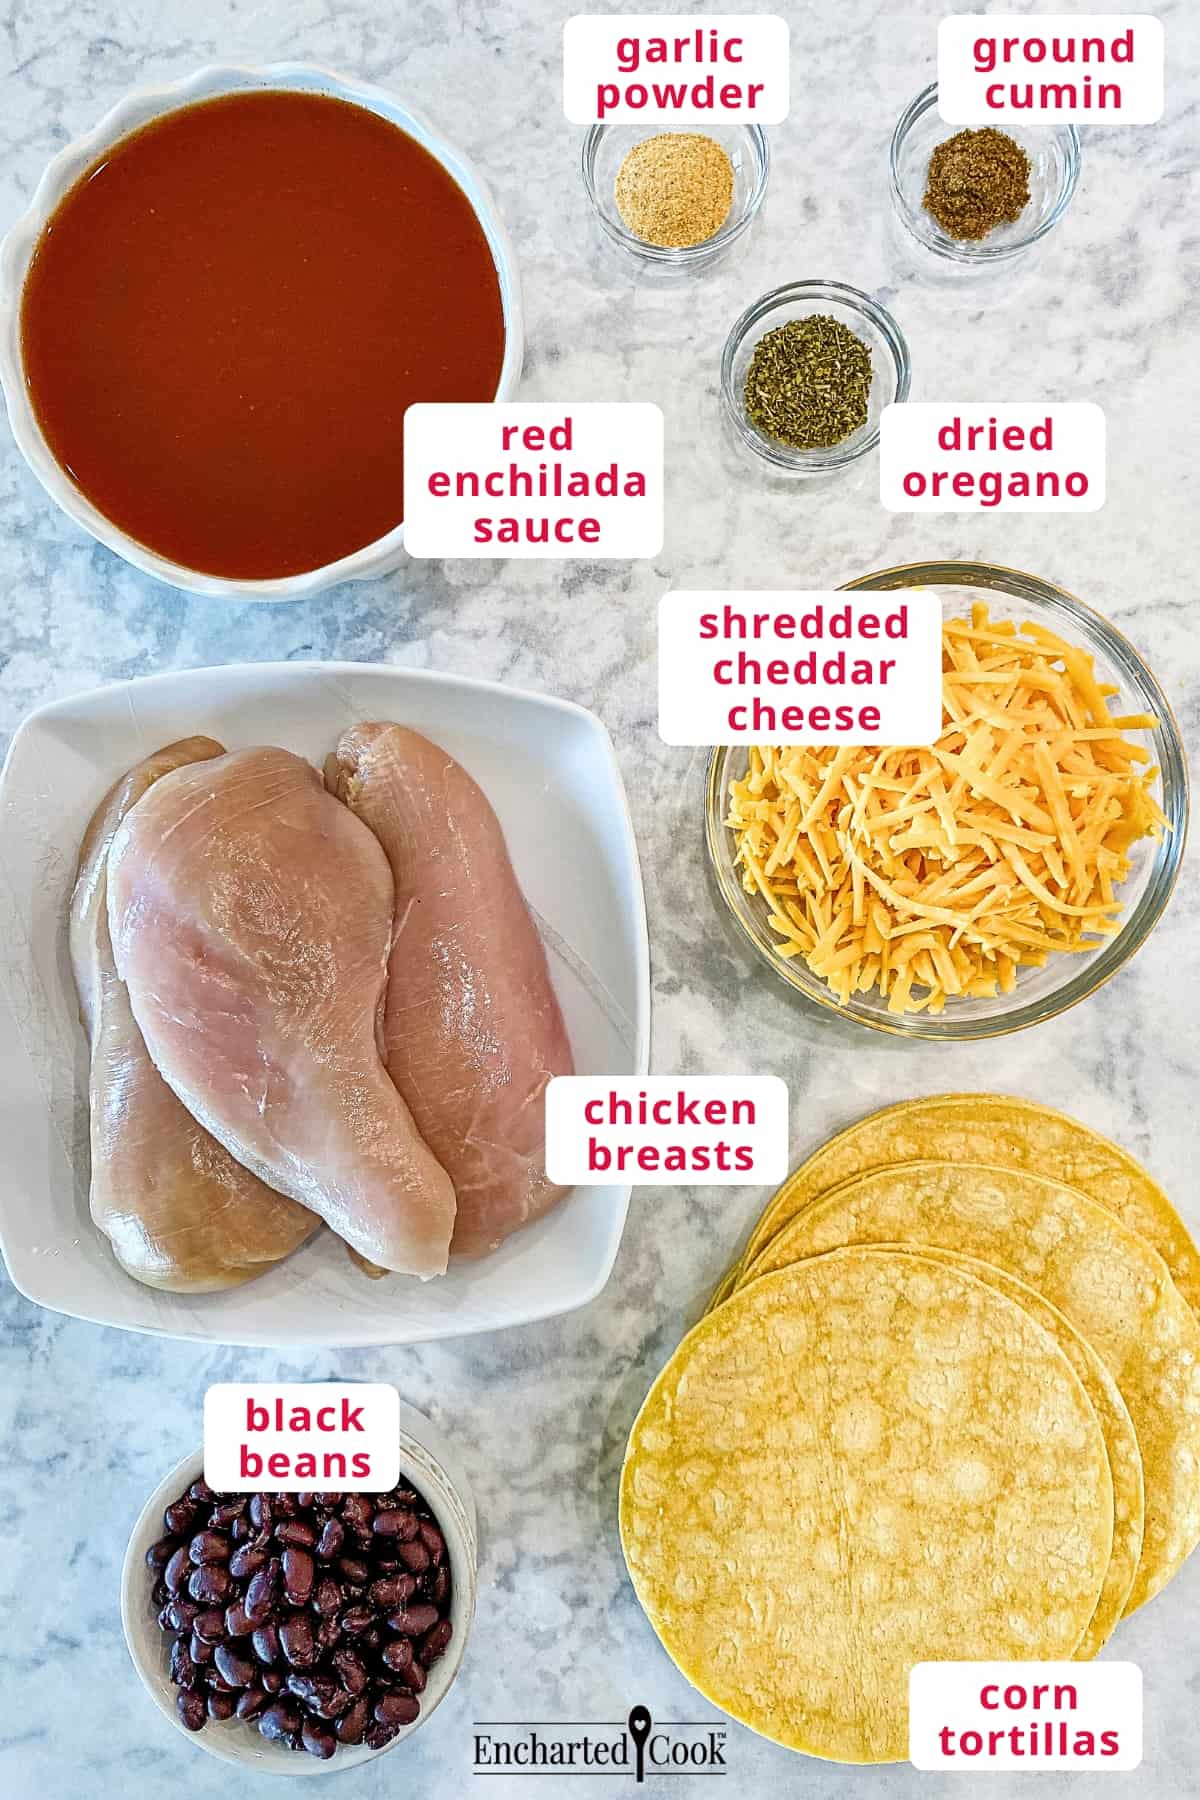 The ingredients, clockwise from top left: red enchilada sauce, garlic powder, ground cumin, dried oregano, shredded cheddar cheese, corn tortillas, black beans, and raw chicken breasts.